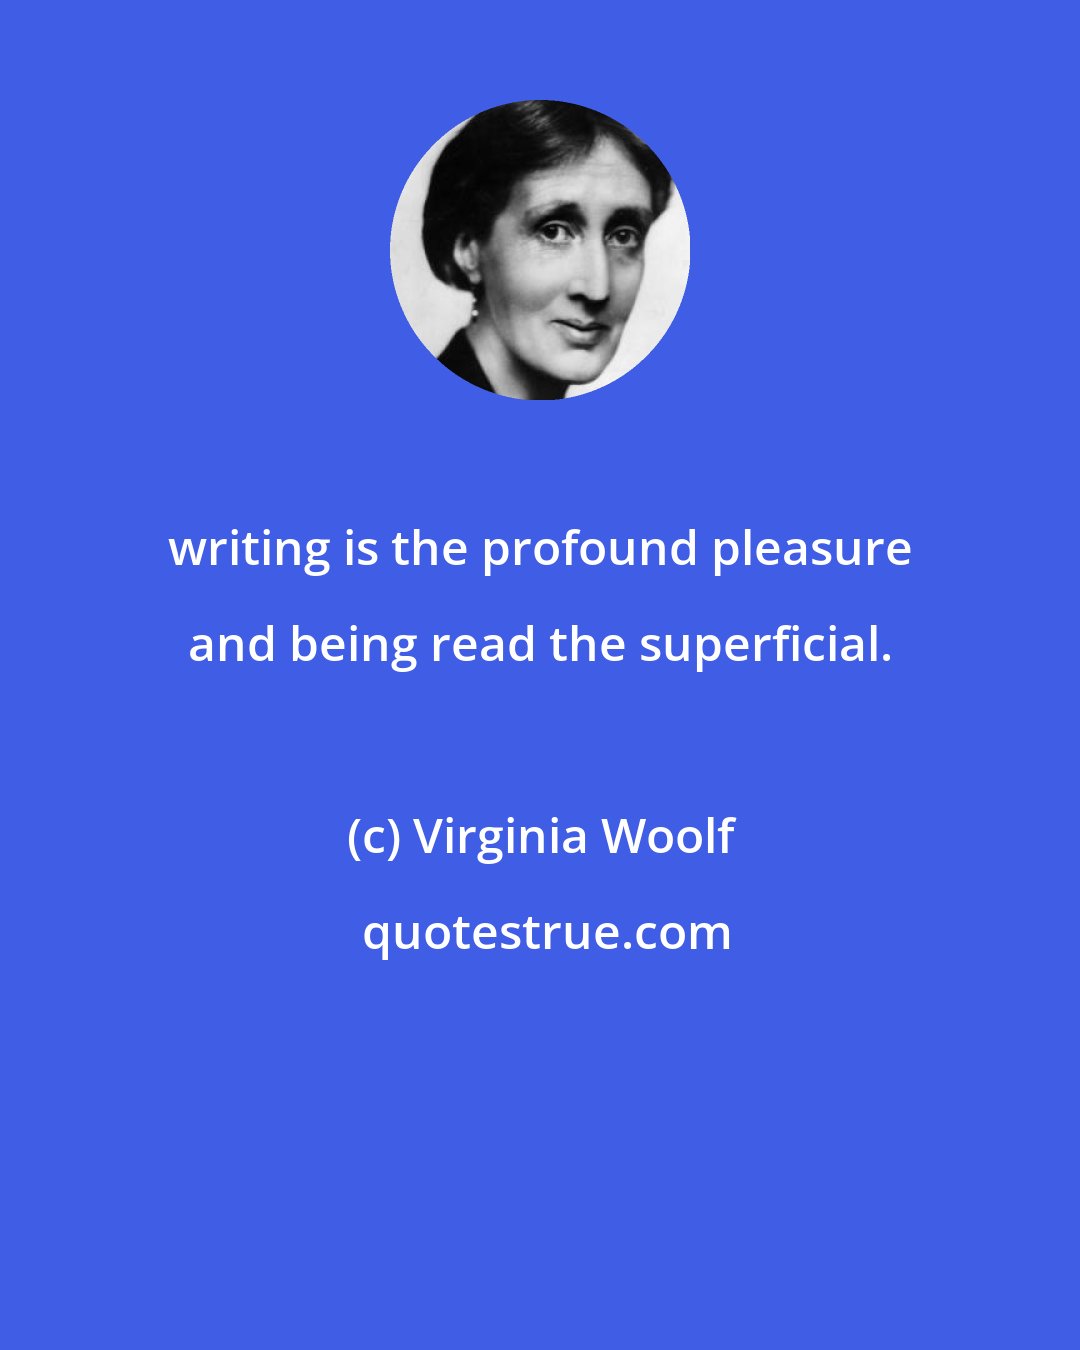 Virginia Woolf: writing is the profound pleasure and being read the superficial.